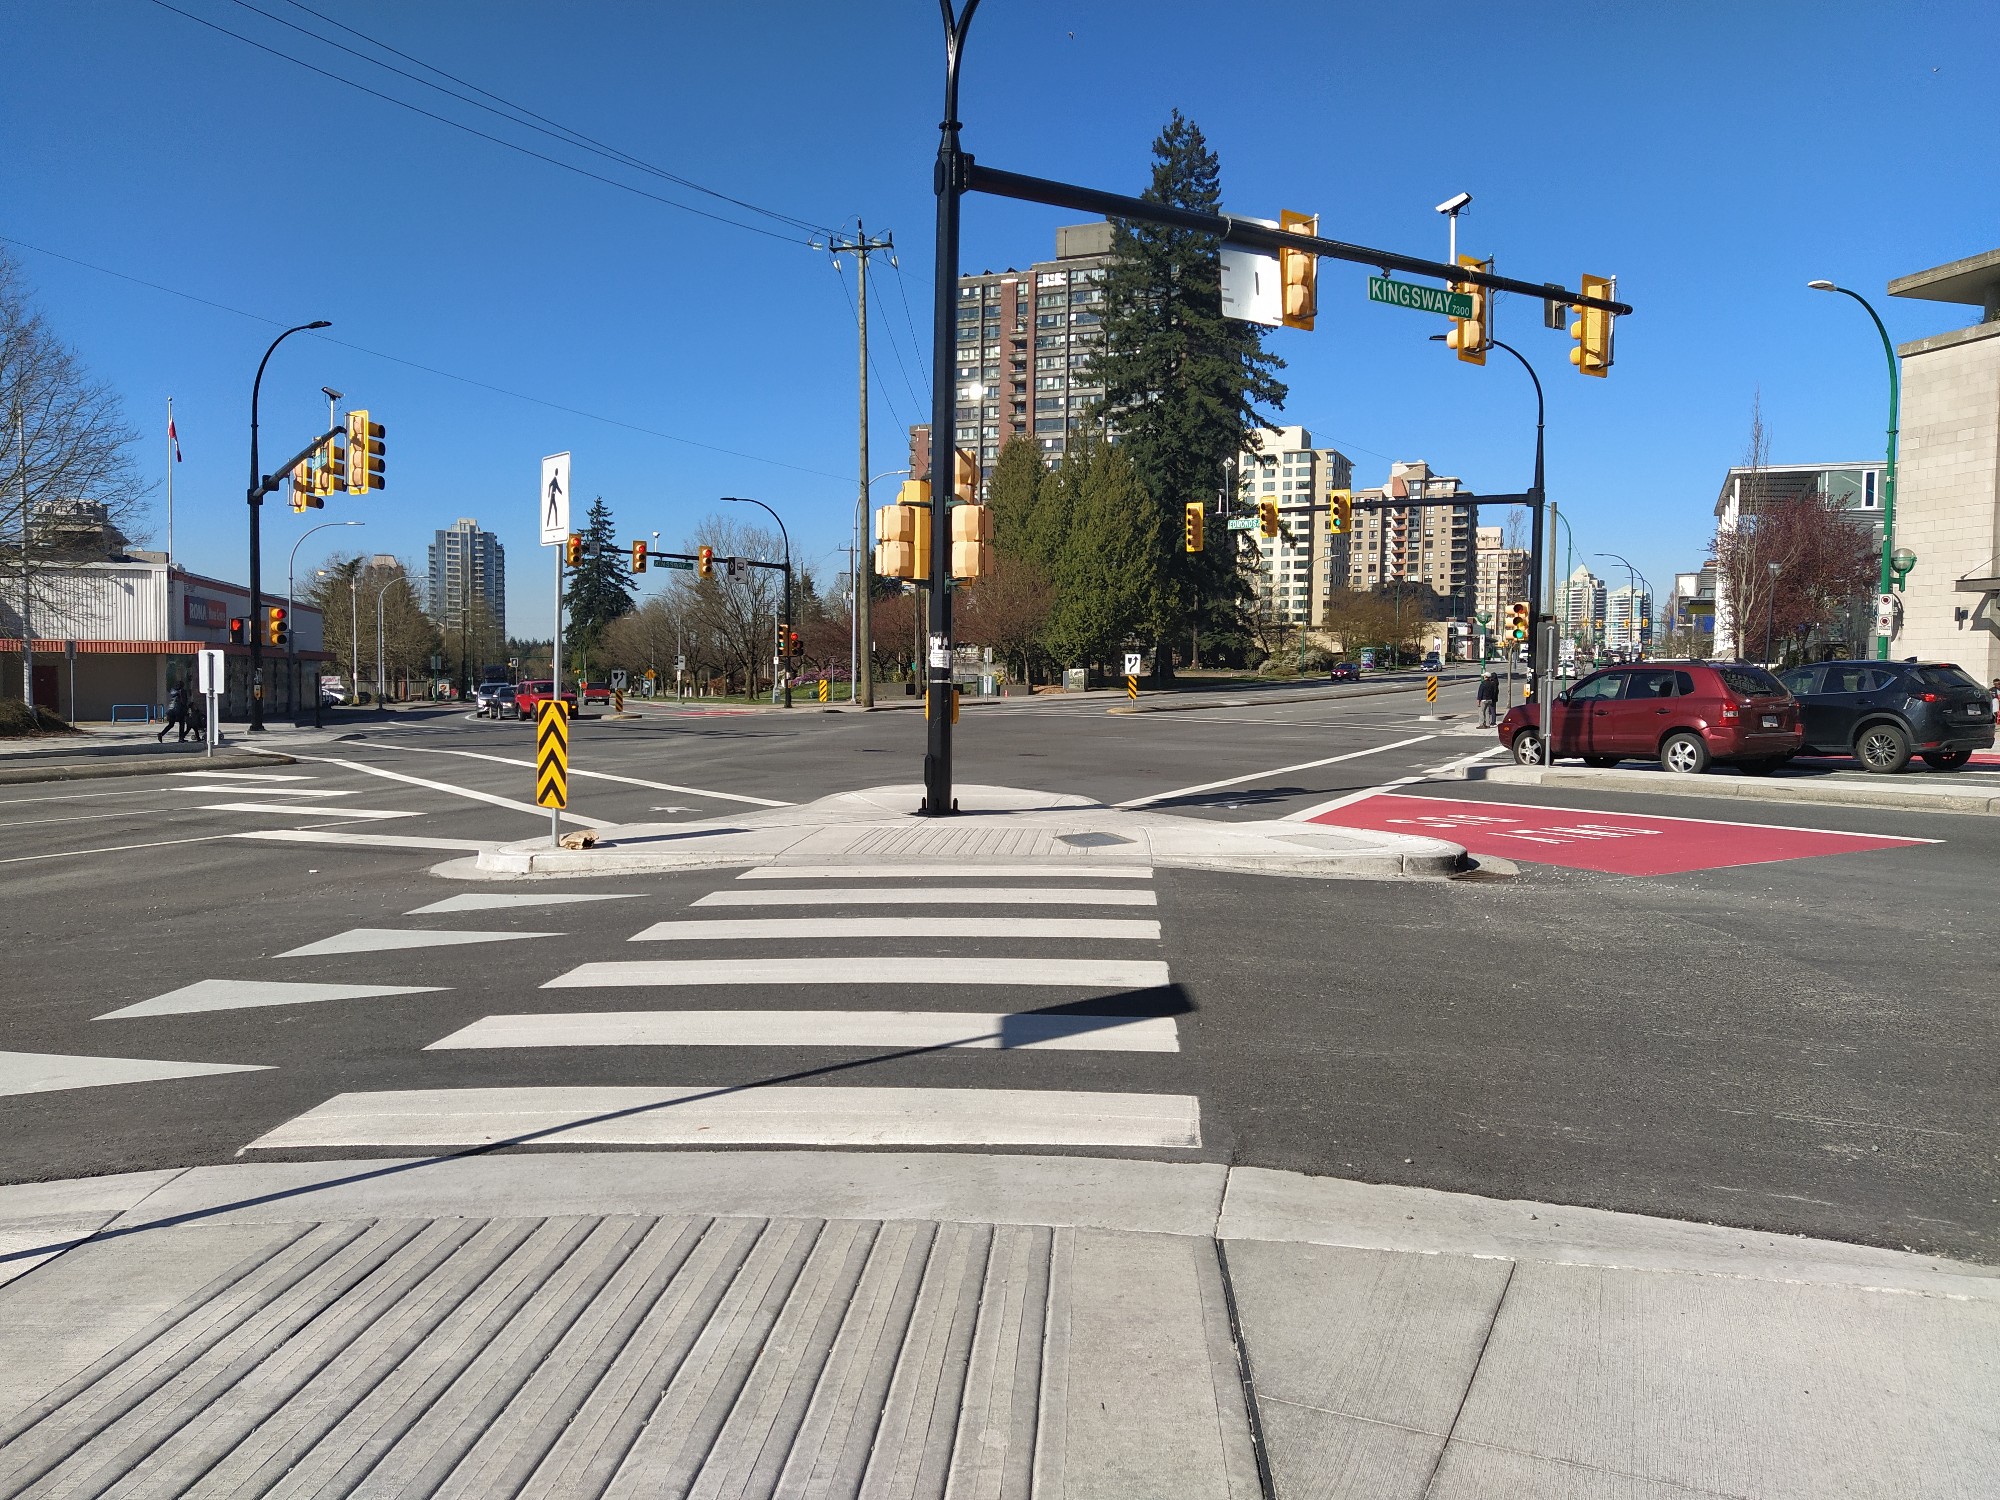 A three-way crosswalk with a pedestrian landing in the middle of the road.